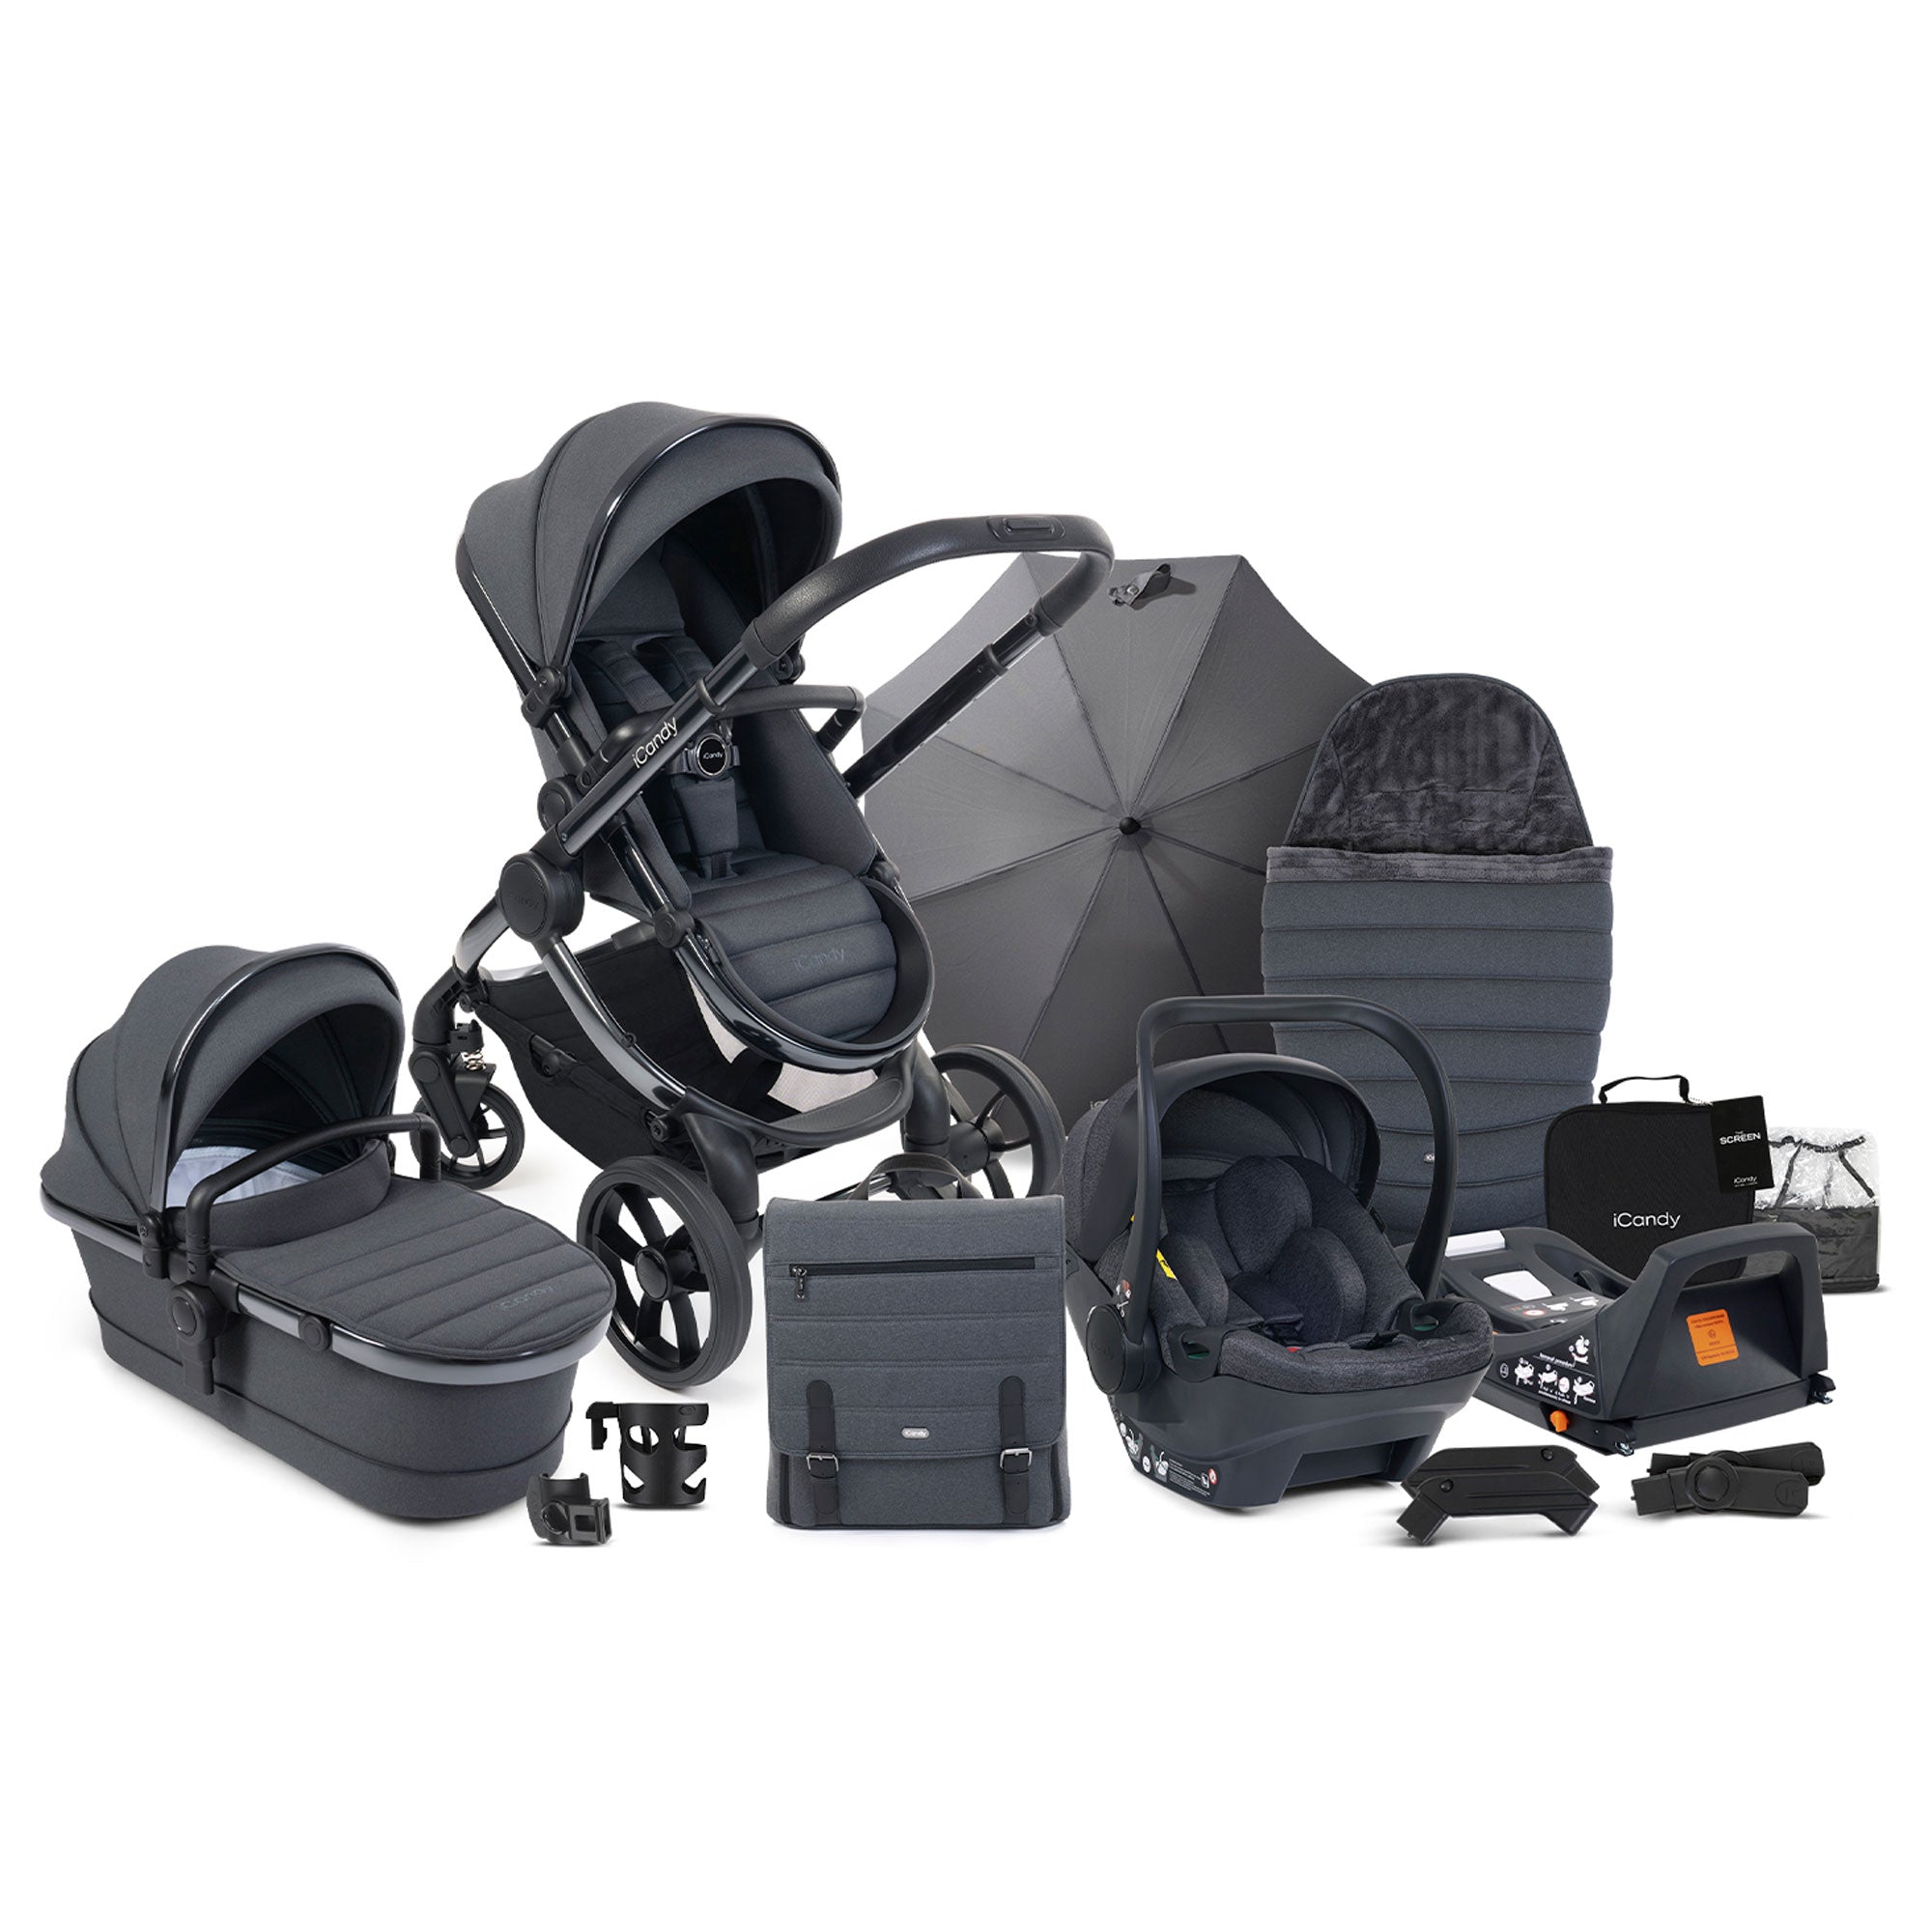 iCandy Peach 7 Complete Bundle with COCOON Car Seat in Dark Grey